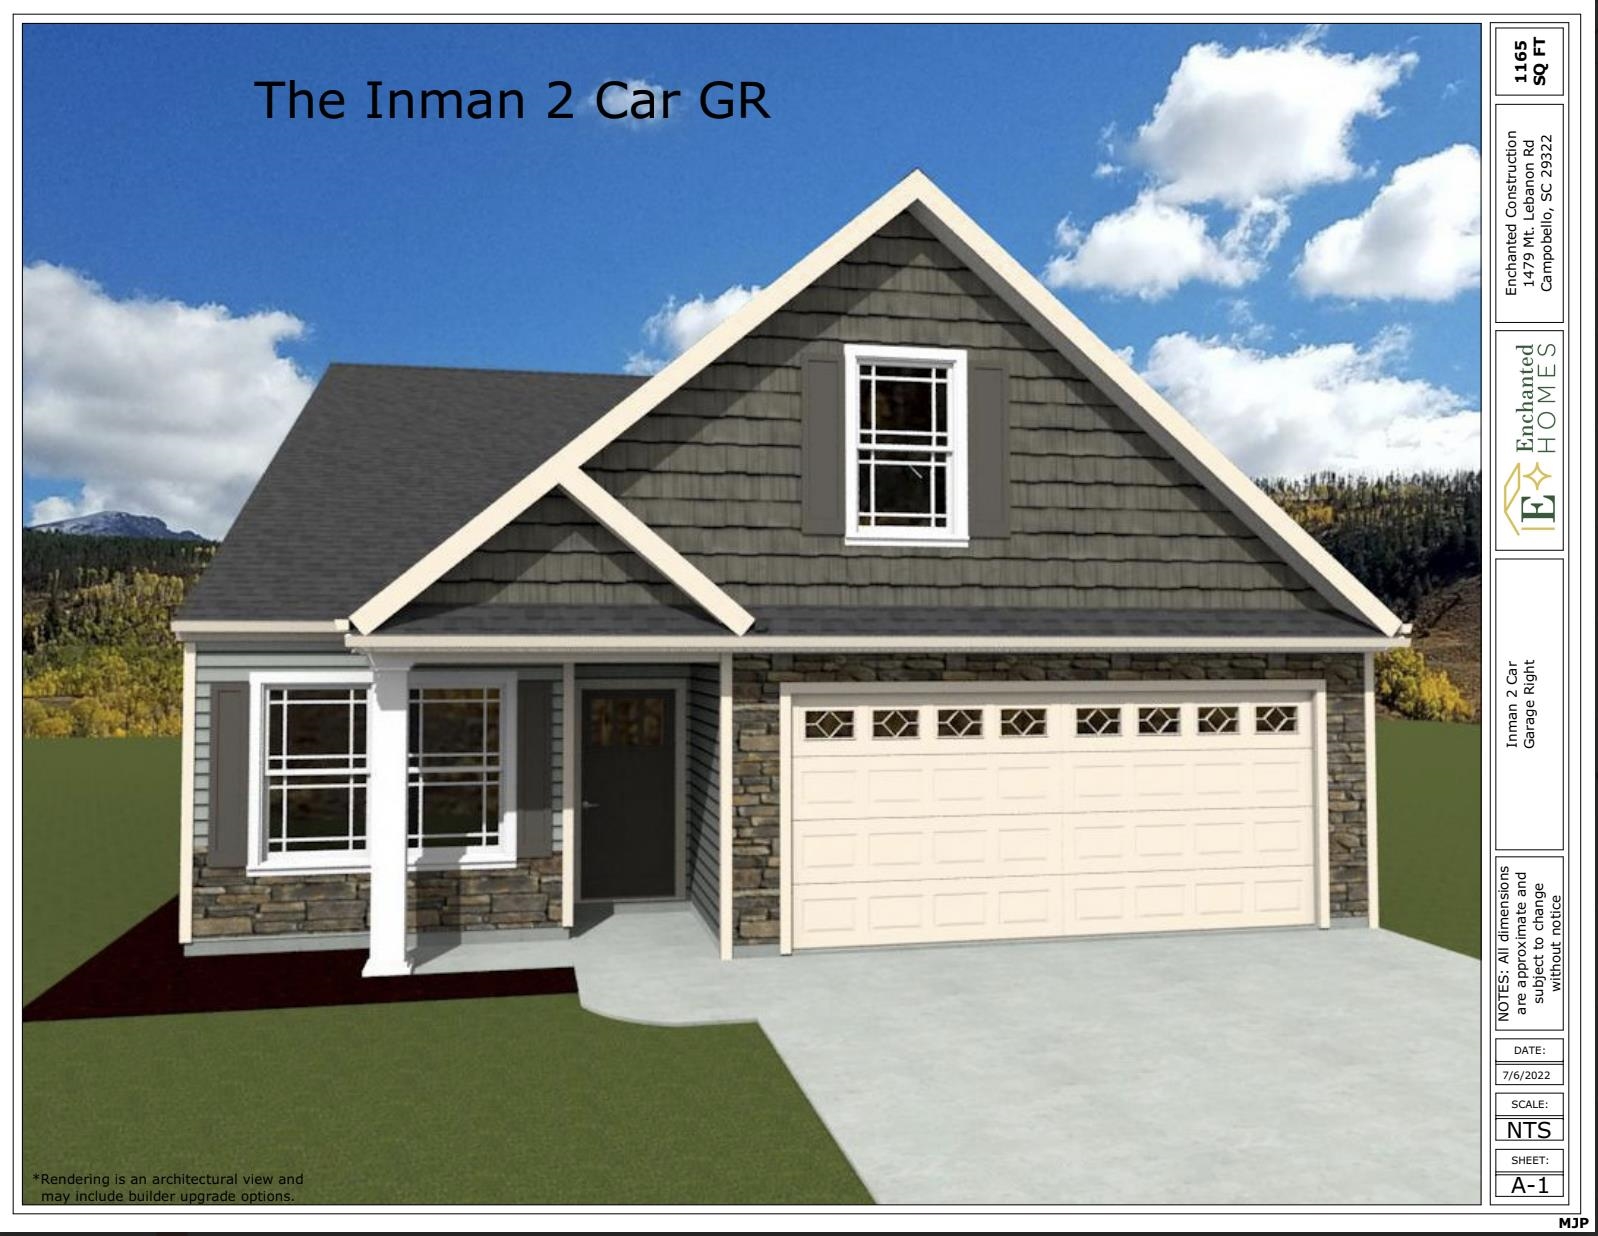 The INMAN plan (Lot 13) features 2 bedrooms and 2 bathrooms. The spacious living area is open into the kitchen/dining area. The master bedroom features a tray ceiling and full bathroom with double vanity. 30-year architectural shingles, site-built construction, and a 10 year limited warranty are included to give you peace of mind.  Preferred Lender/Attorney Closing Costs Incentive Offered!